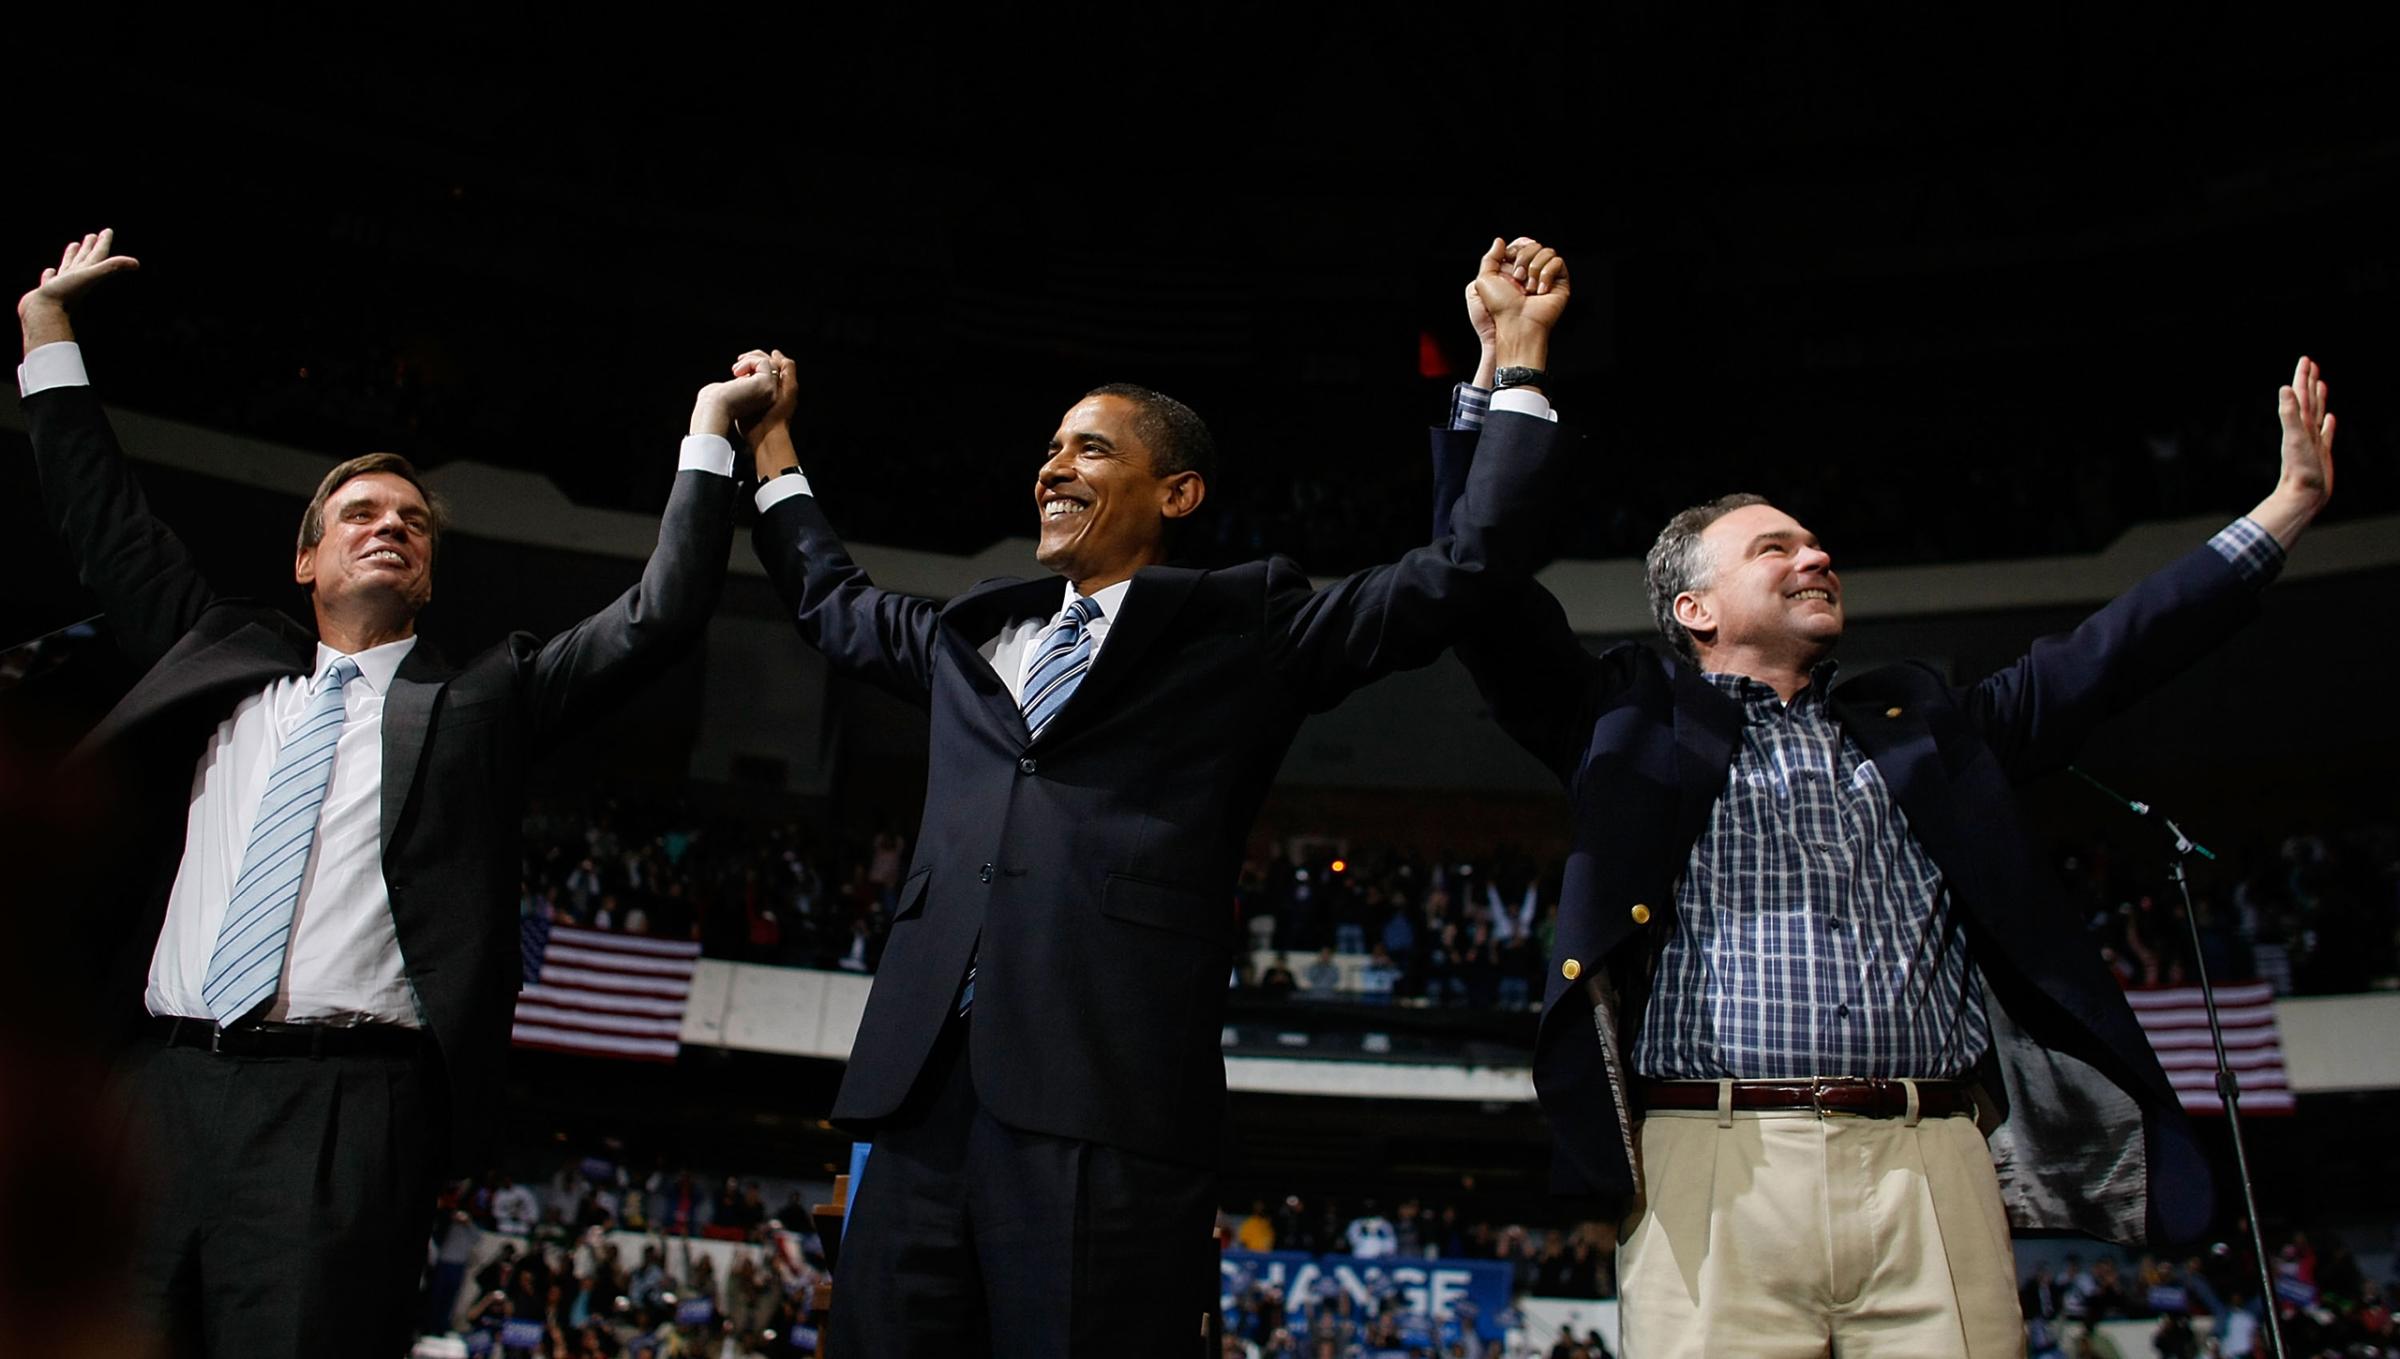 Mark Warner, Democratic presidential nominee U.S. Sen. Barack Obama and Virginia Governor Tim Kaine raise their arms together during a campaign event at the Richmond Coliseum on Oct. 22, 2008.